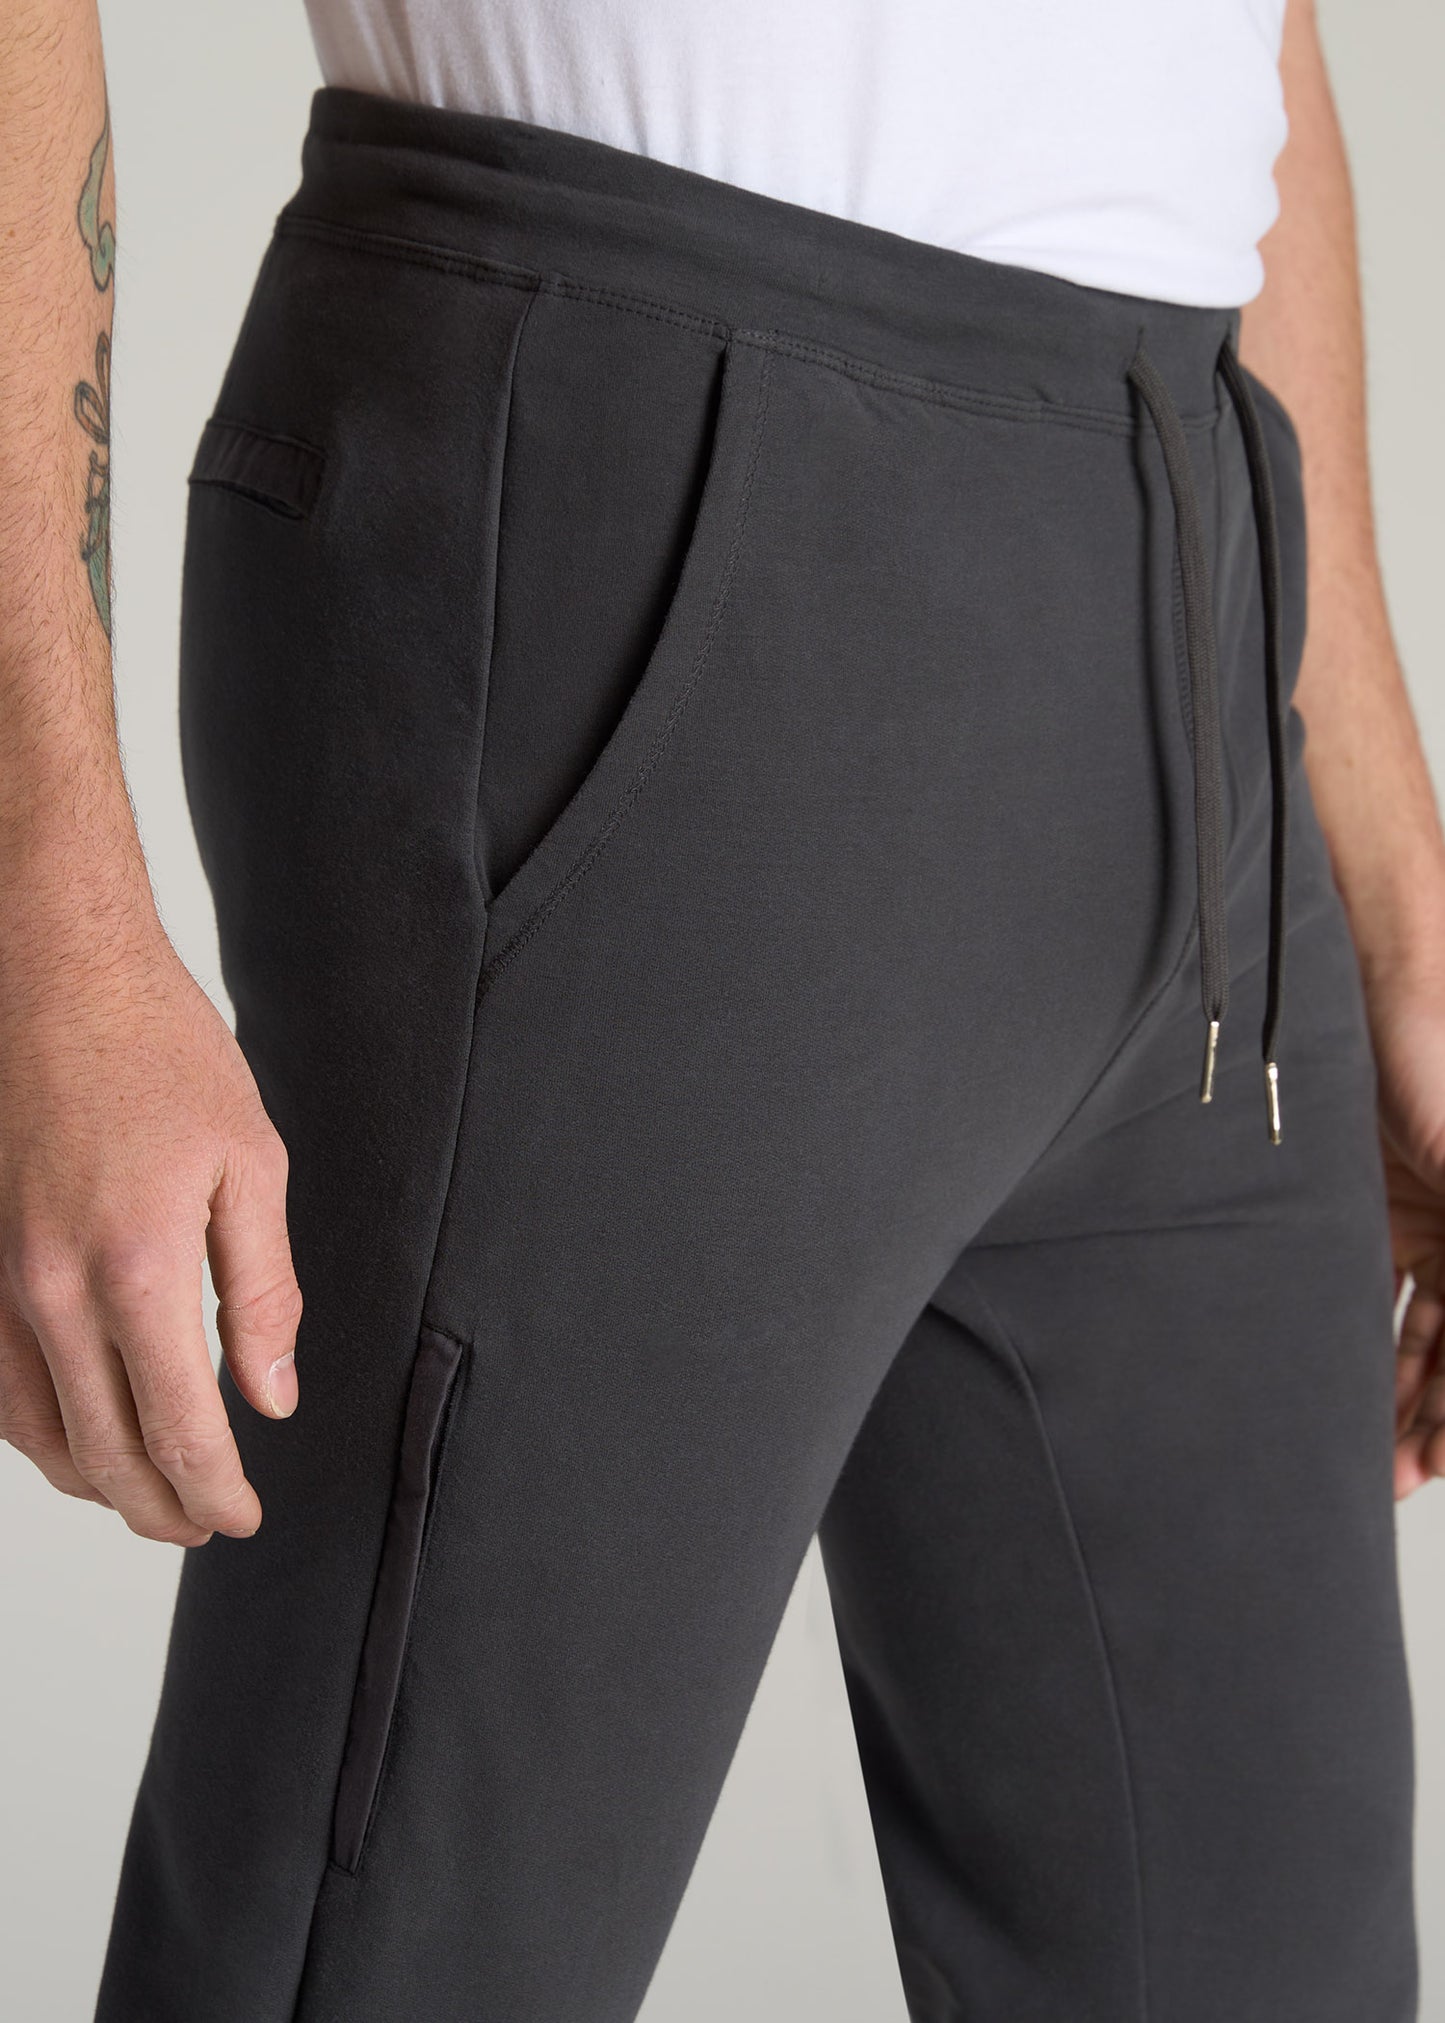       American-Tall-Men-Microsanded-French-Terry-Sweatpant-Iron-Grey-detail